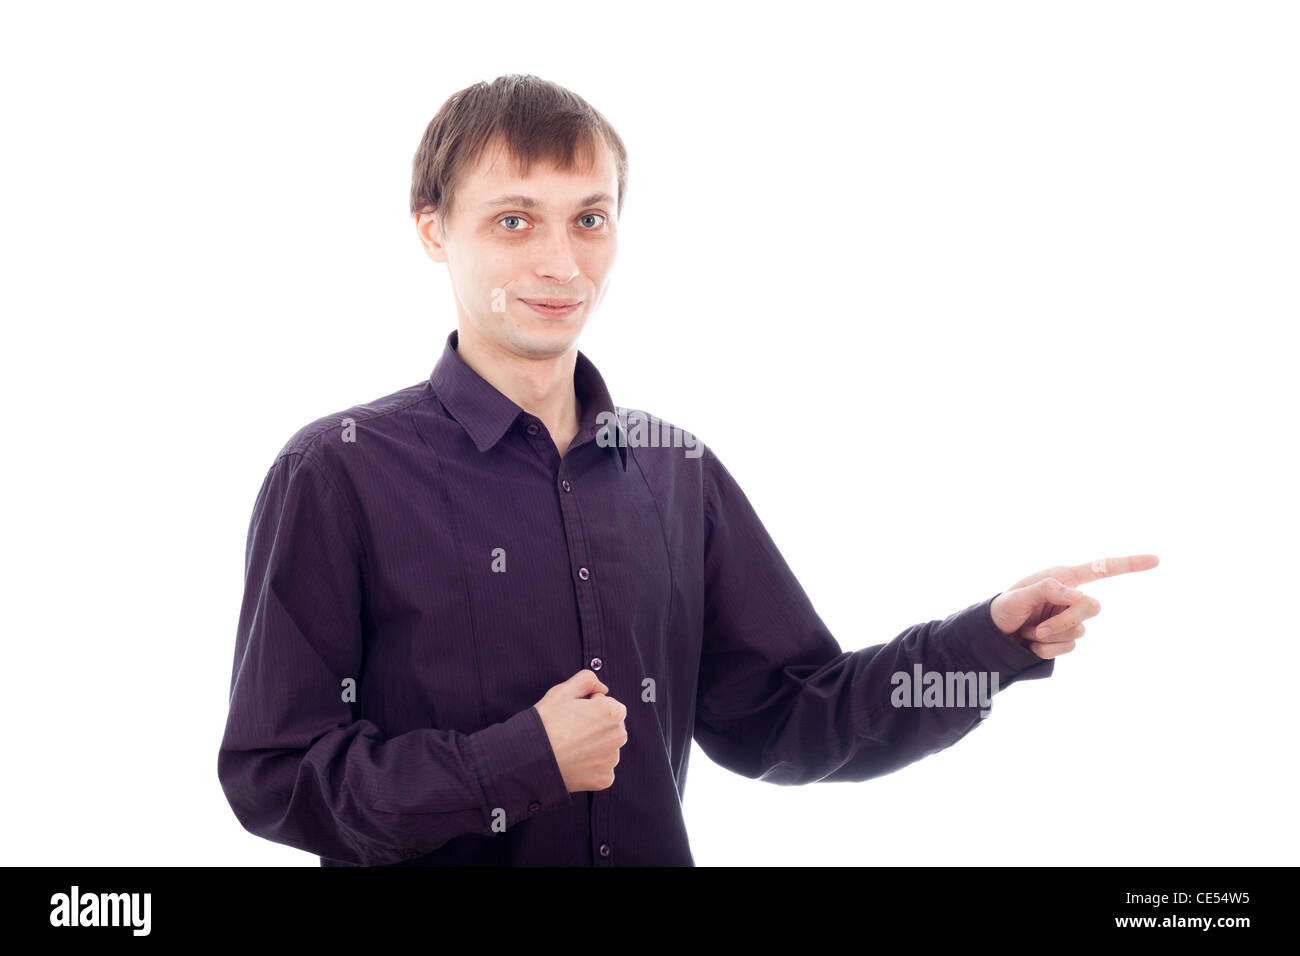 Funny nerd man pointing, isolated on white background. Stock Photo